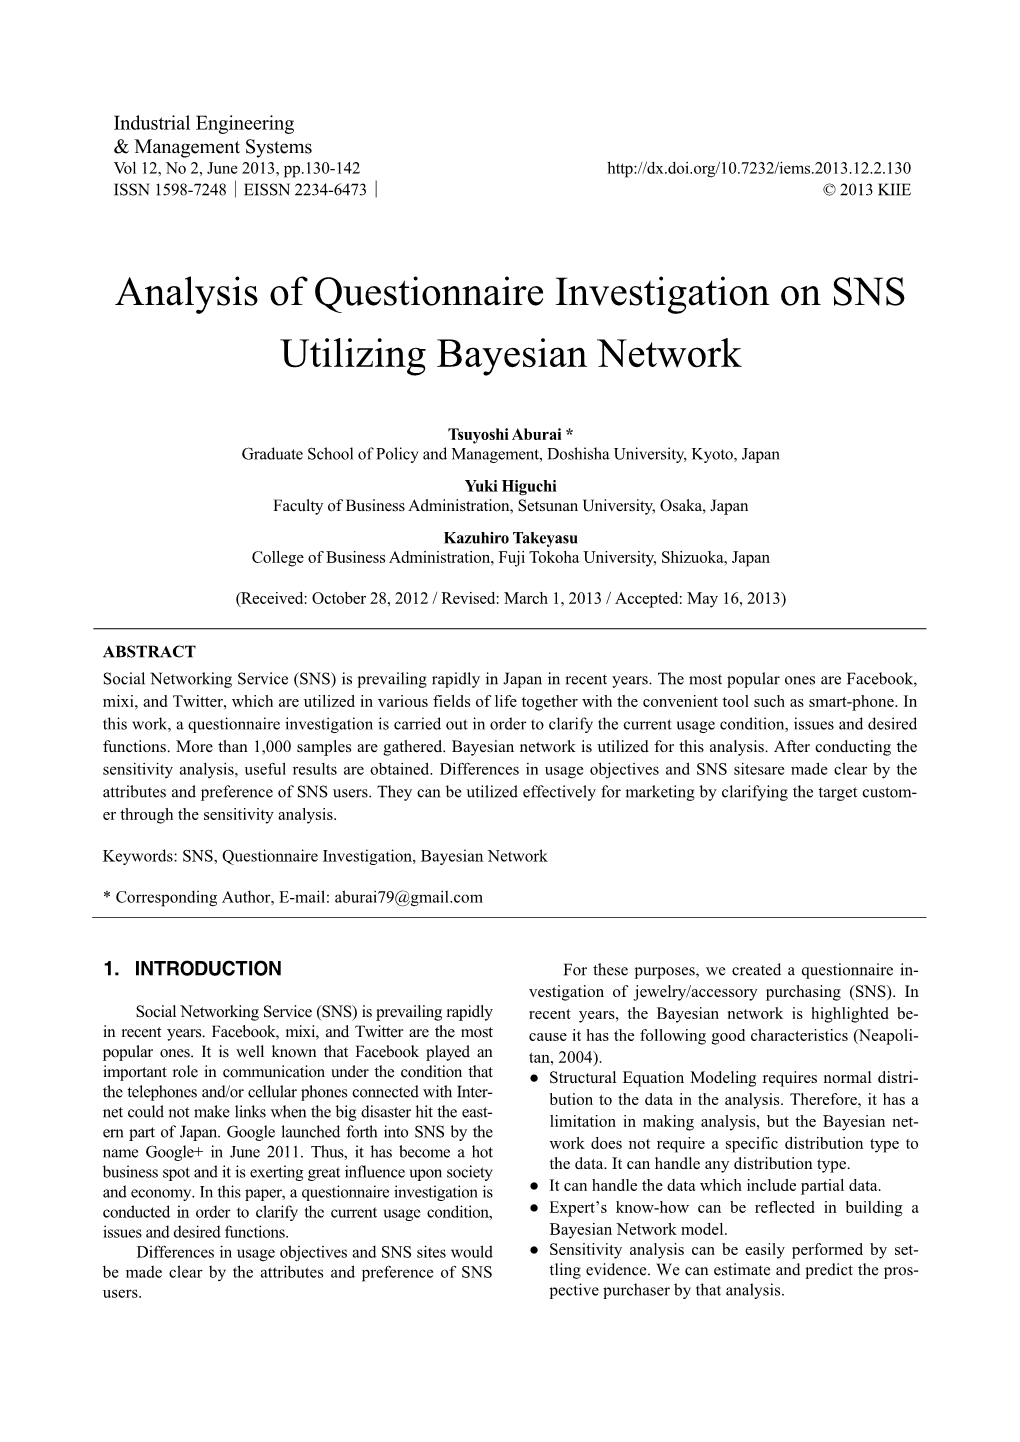 Analysis of Questionnaire Investigation on SNS Utilizing Bayesian Network